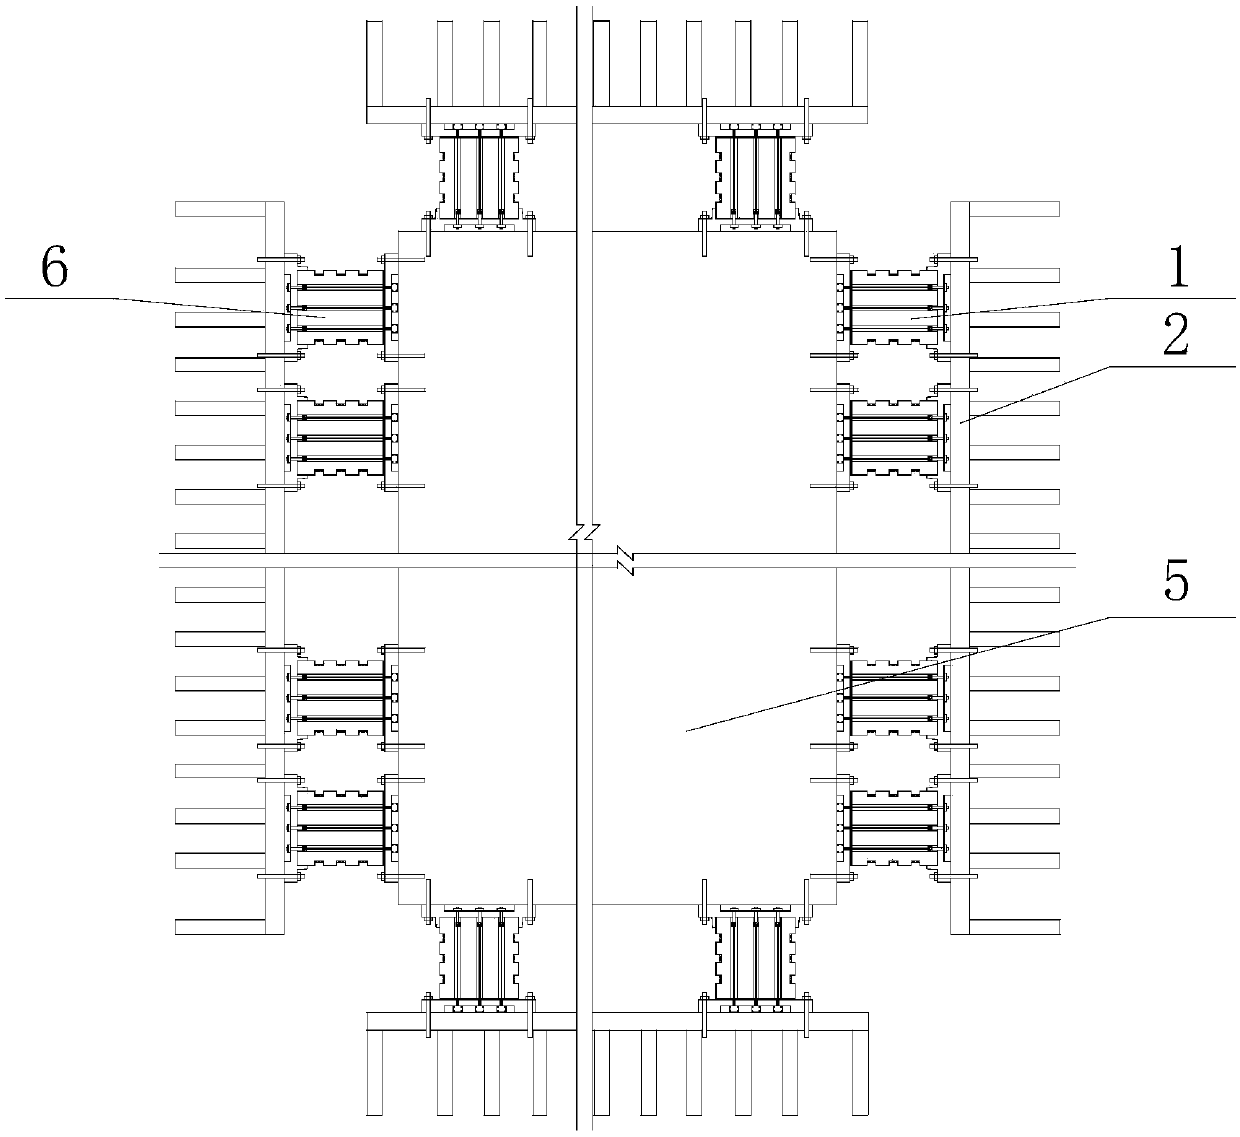 A Bridge Damping Control System Combining High Damping Rubber and Shape Memory Alloy